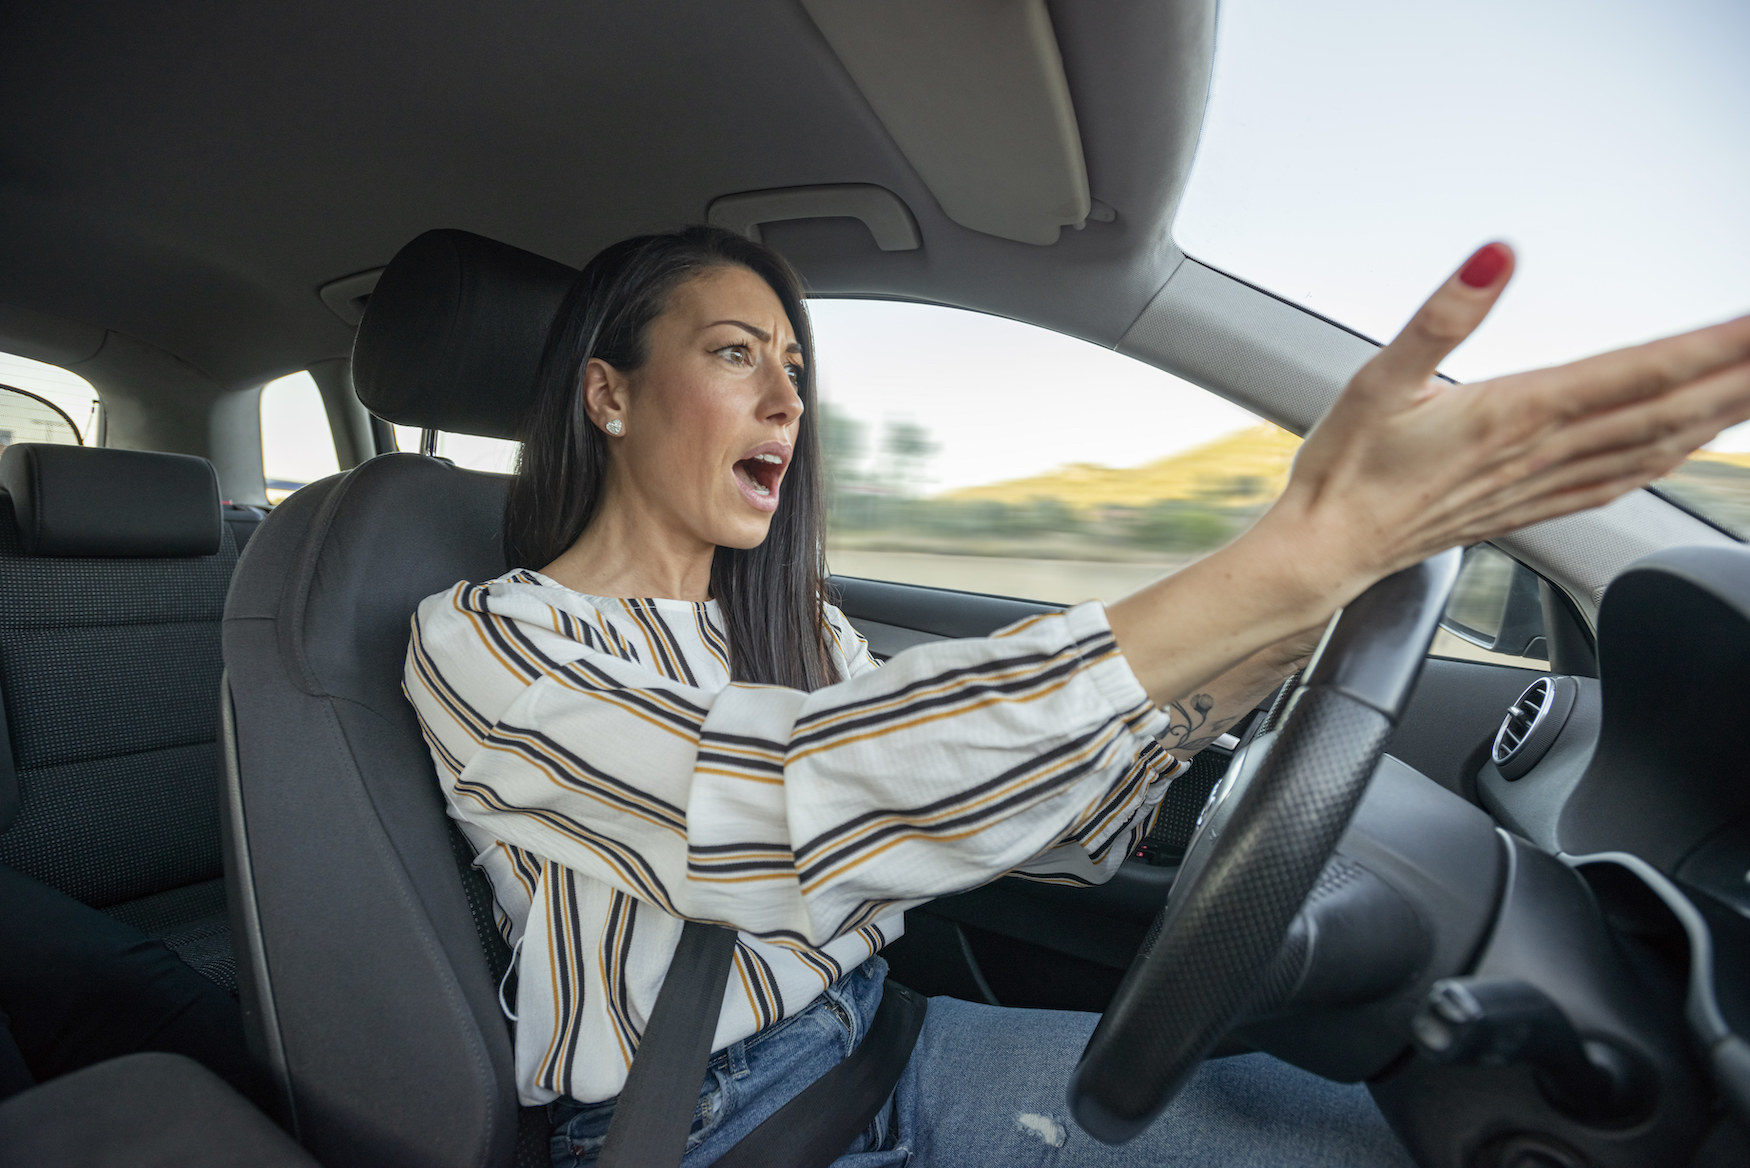 A woman looking outraged as she drives her car